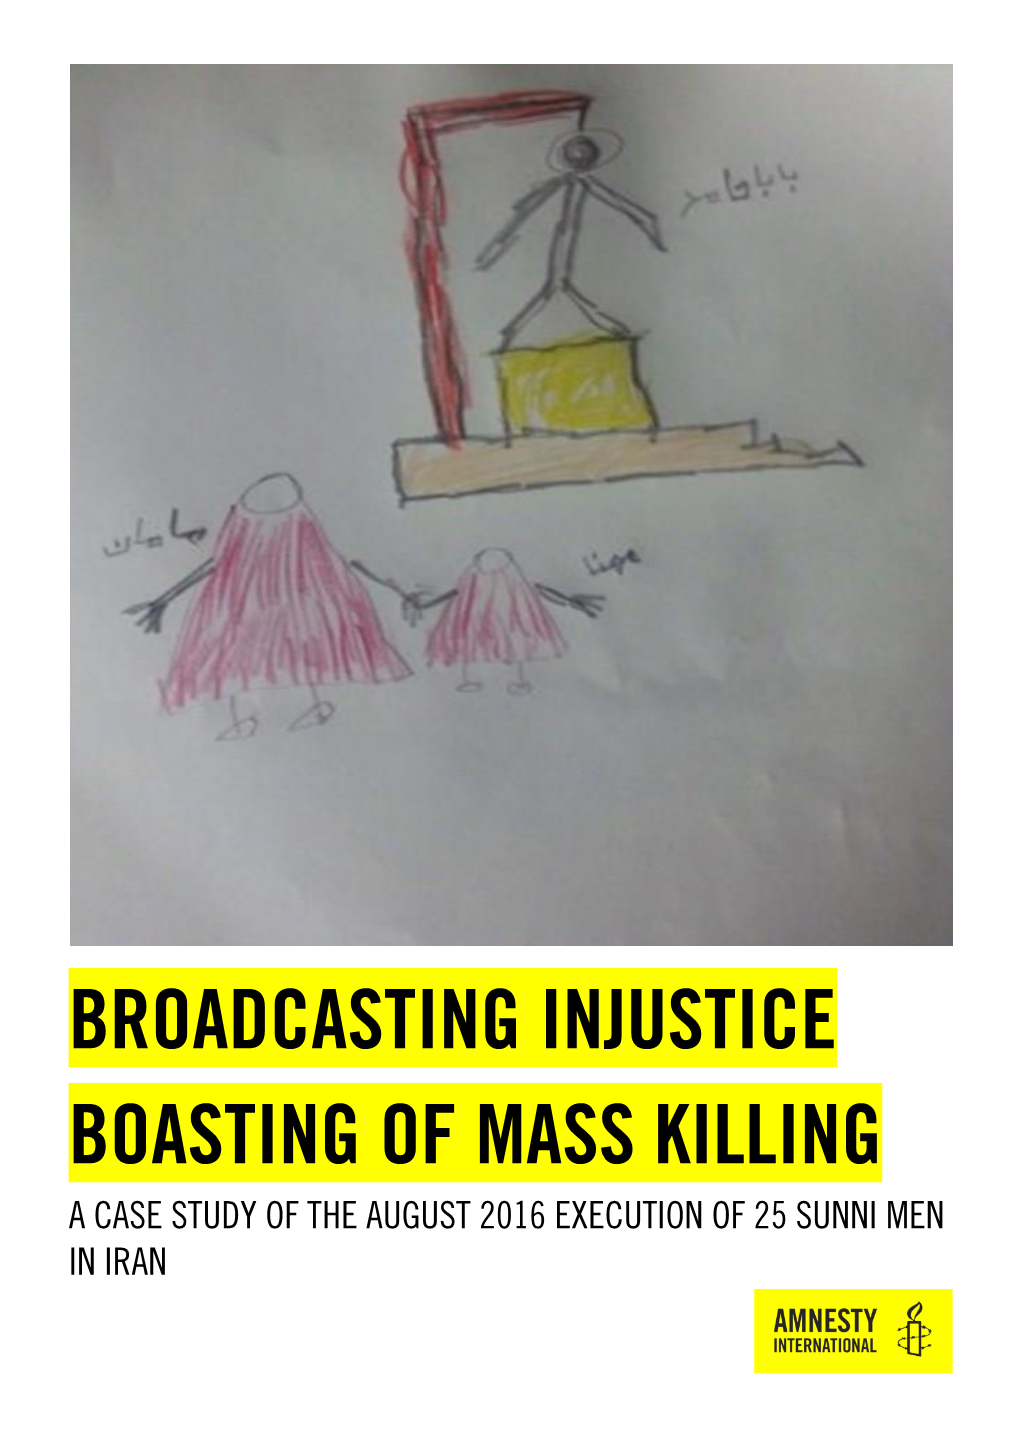 Broadcasting Injustice Boasting of Mass Killing a Case Study of the August 2016 Execution of 25 Sunni Men in Iran